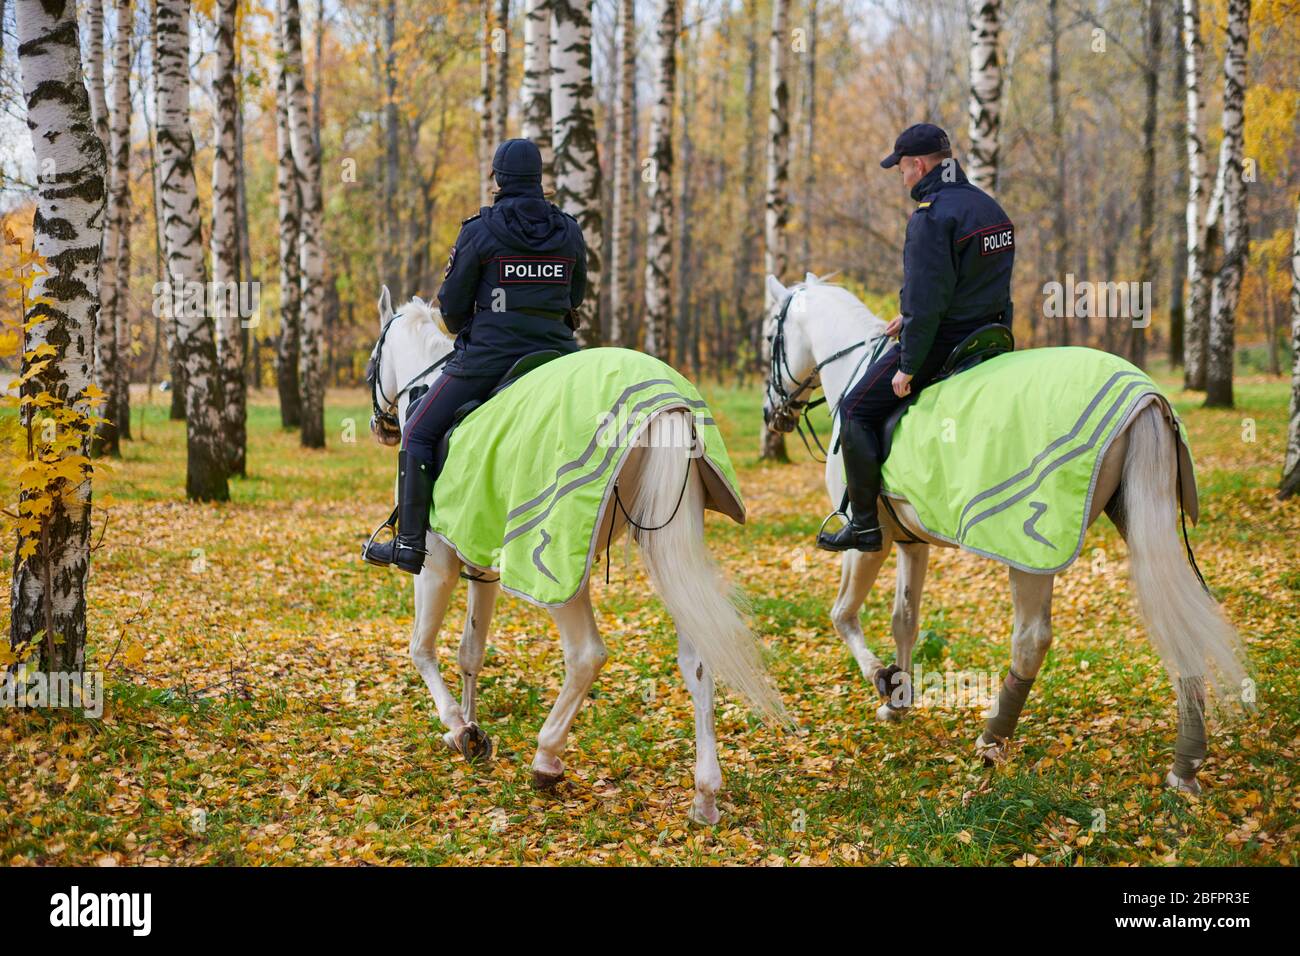 Mounted police in autumn city park, back view. Two police officers on ...